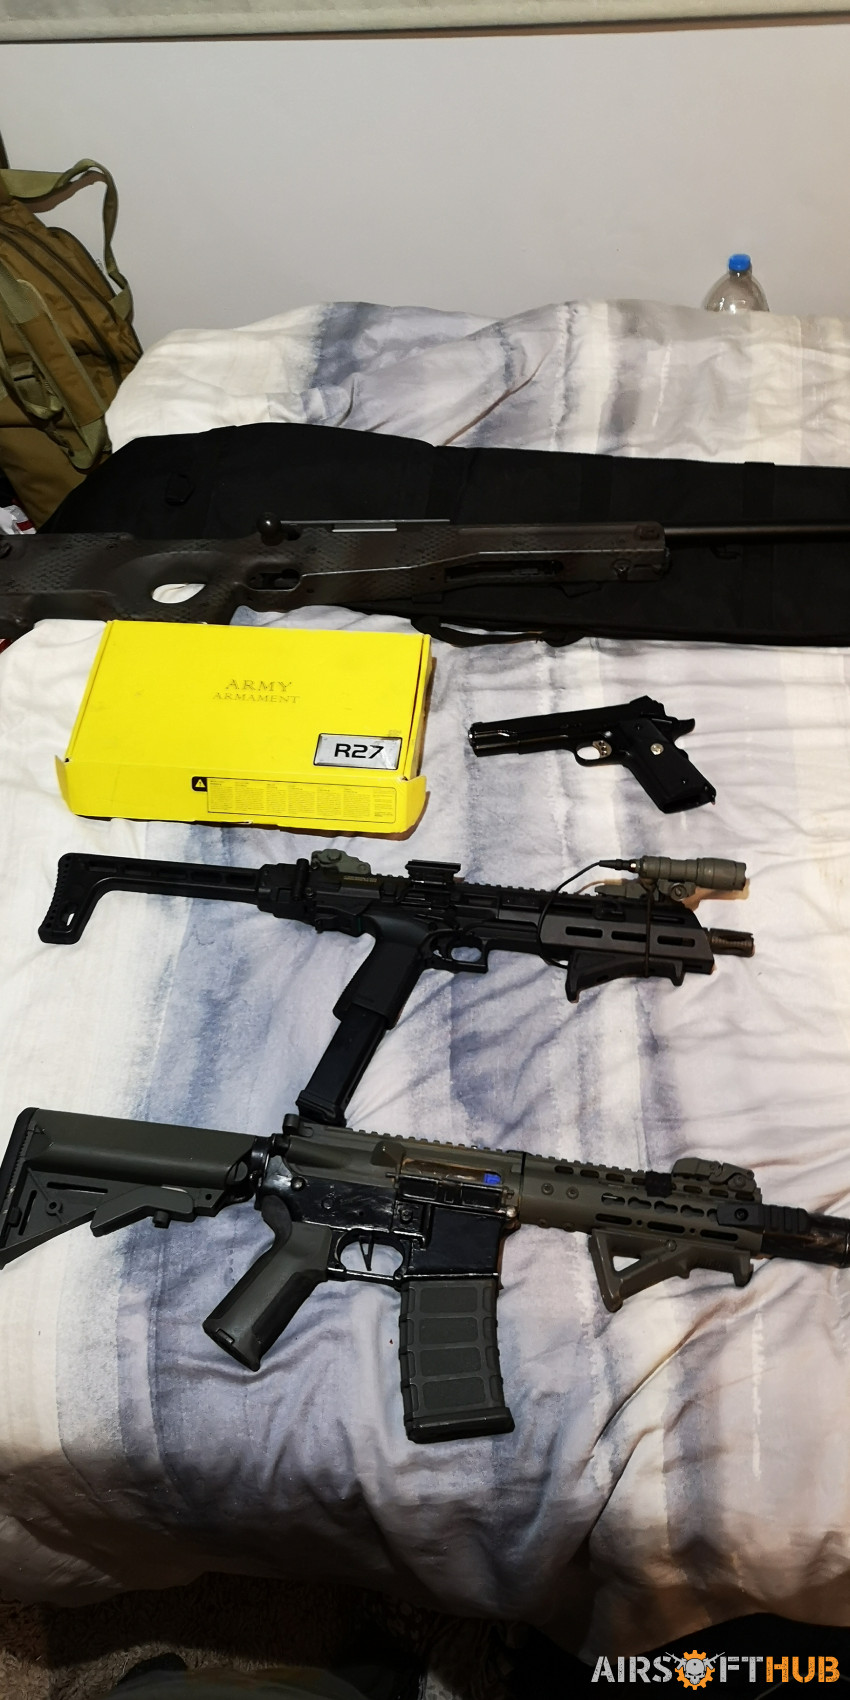 Swaps/Trades for LMG - Used airsoft equipment